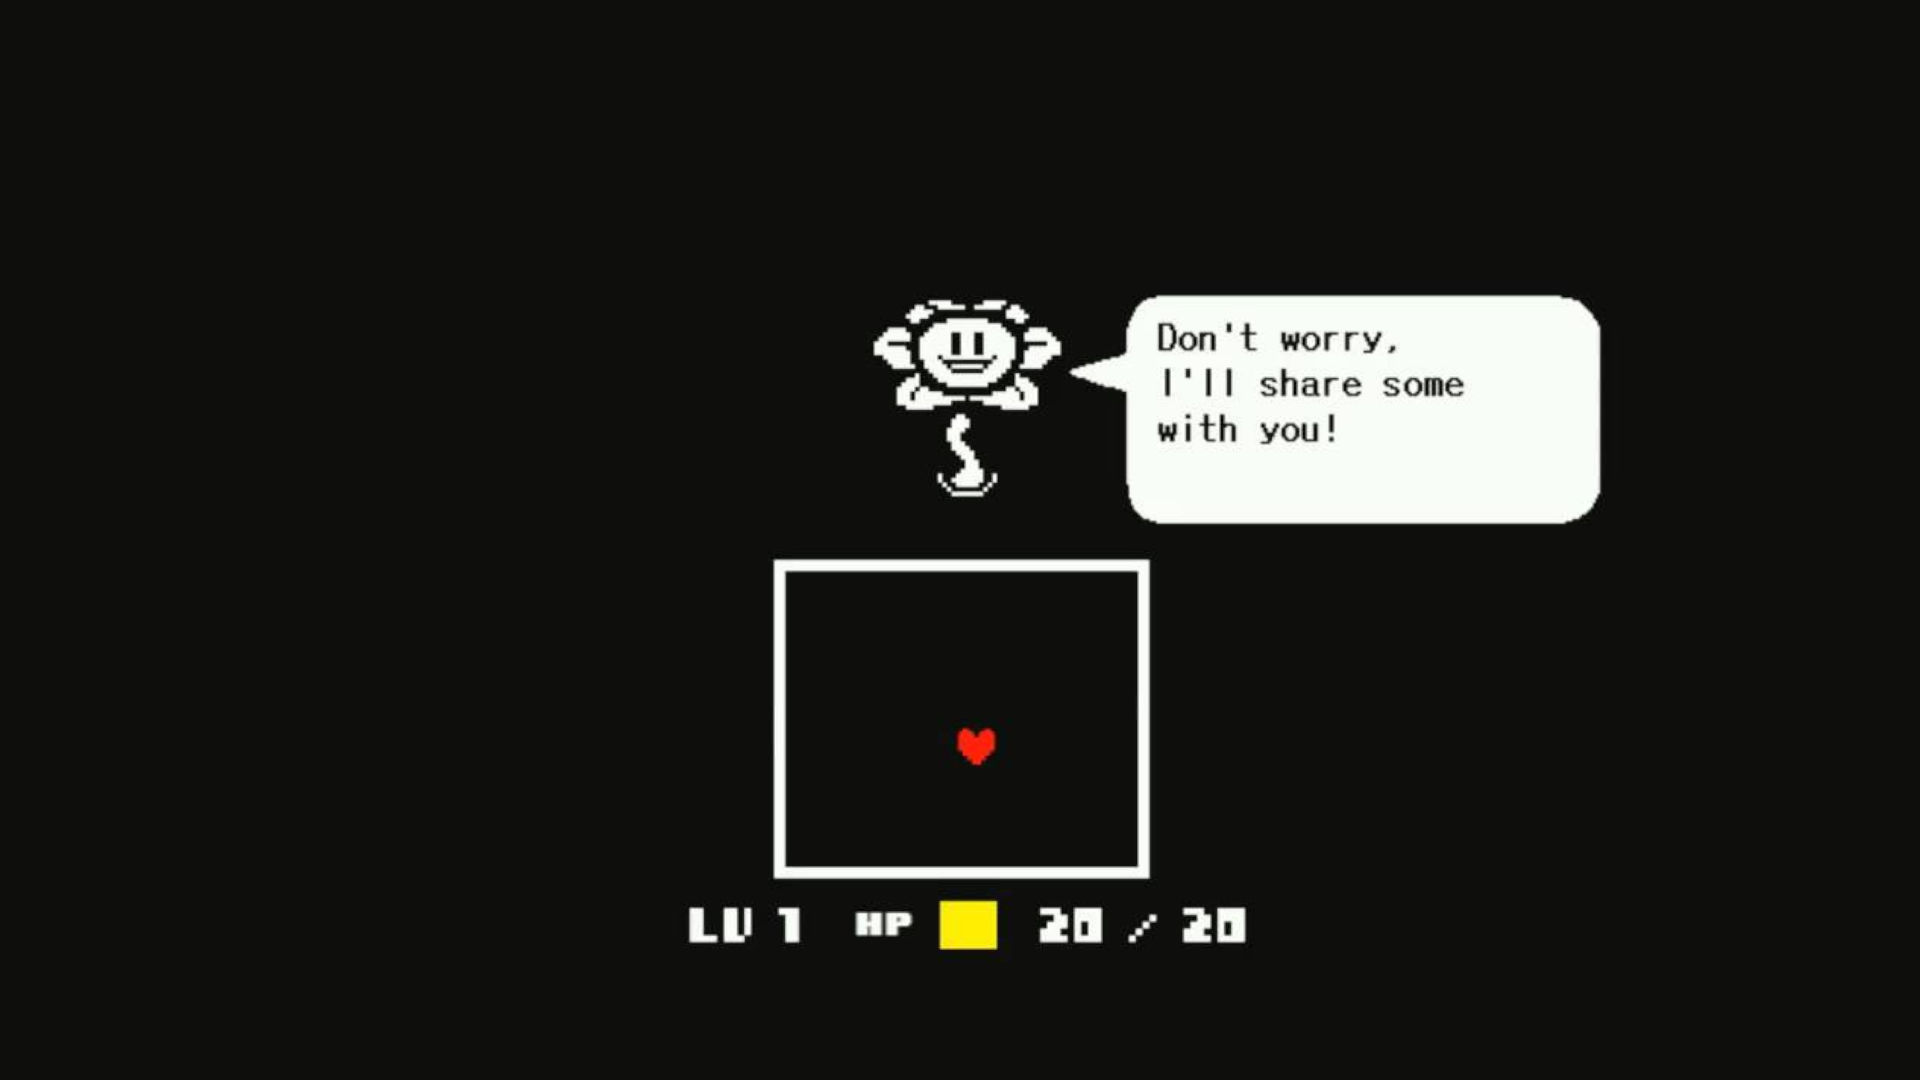 Undertale Chara lore, gender, age, and relationships